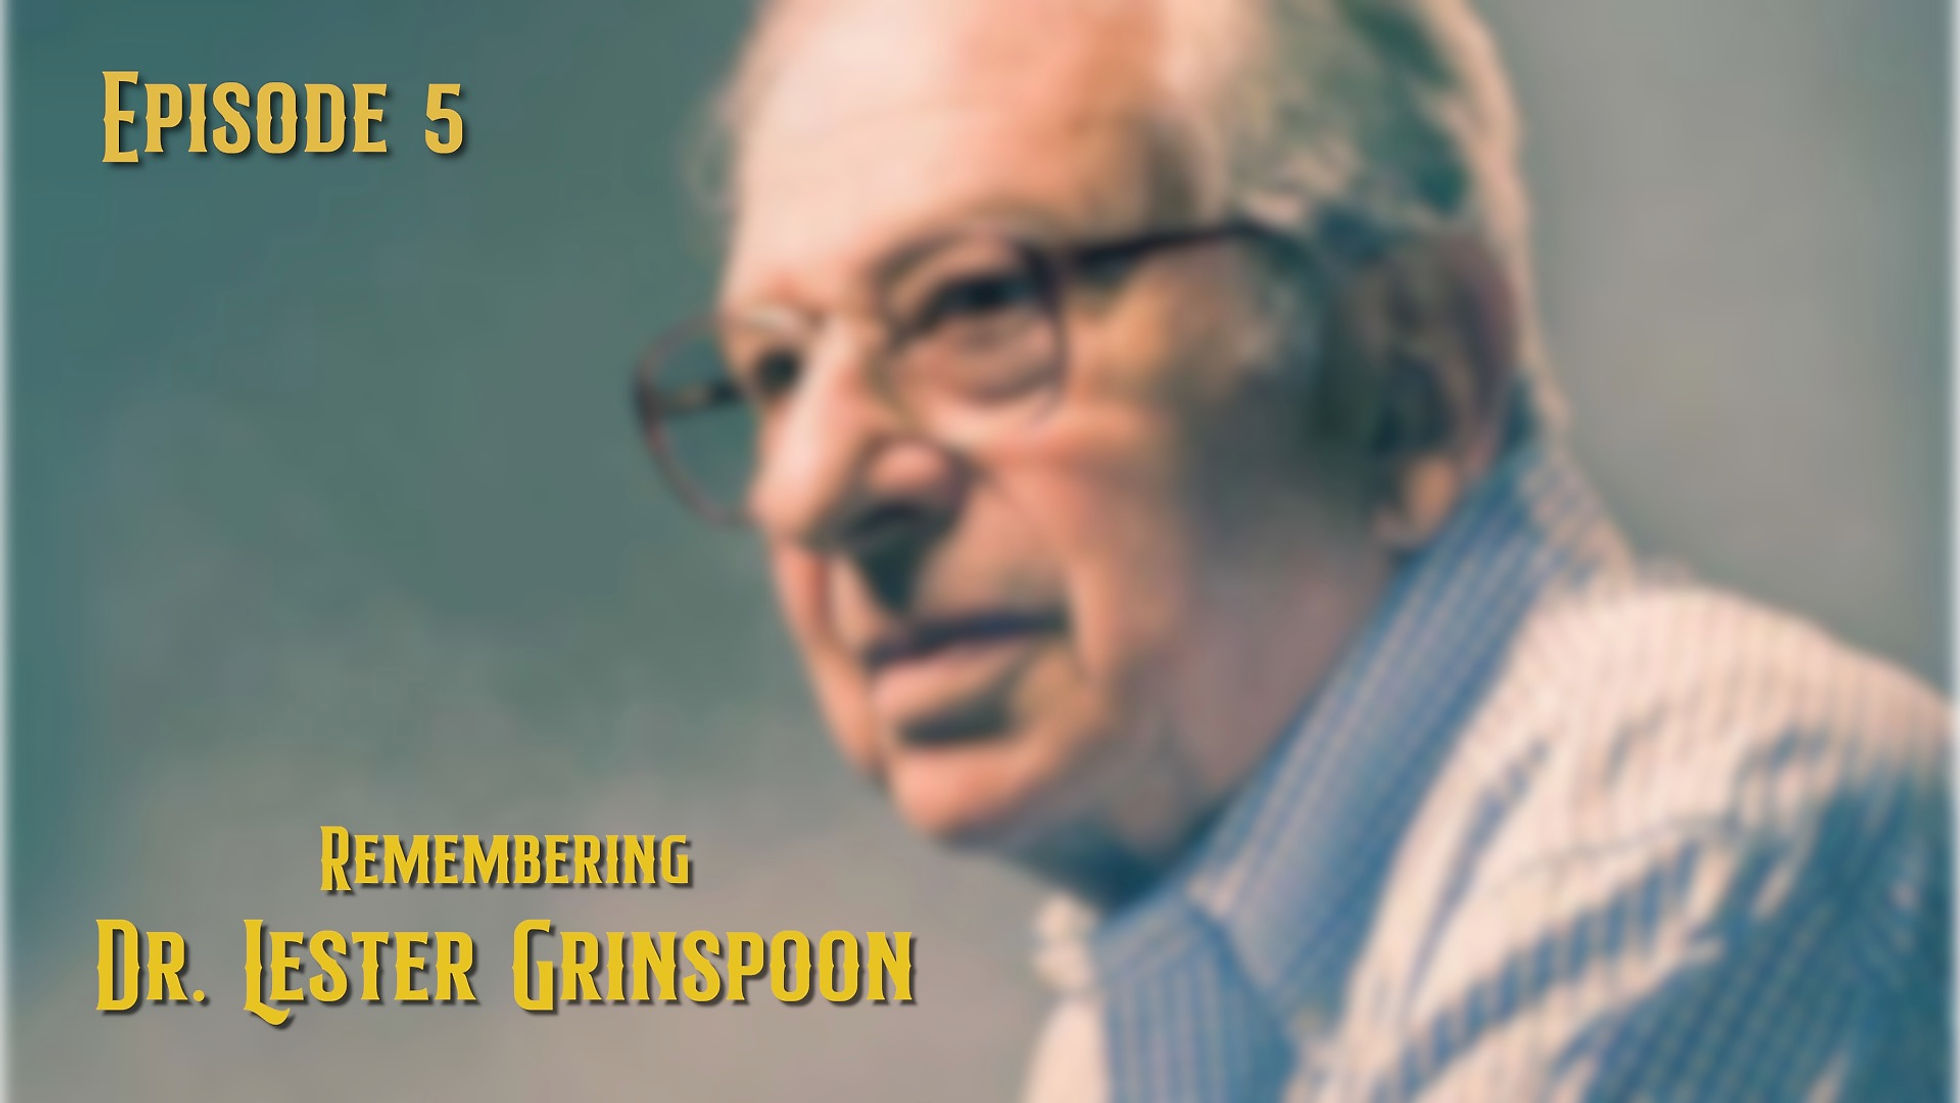 Tribute to Dr. Lester Grinspoon